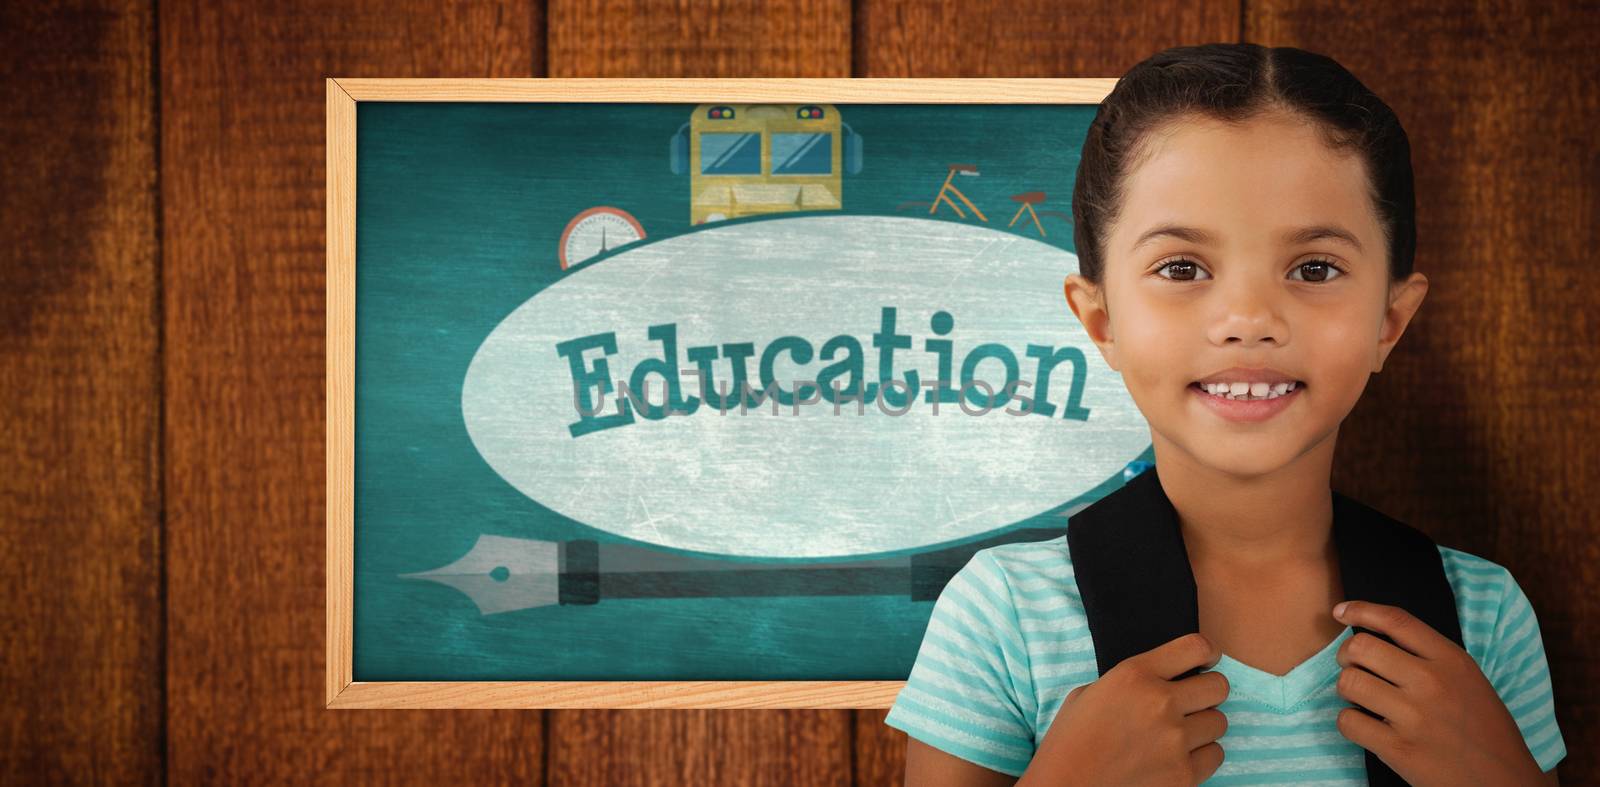 Portrait of smiling girl with bag against education against green chalkboard